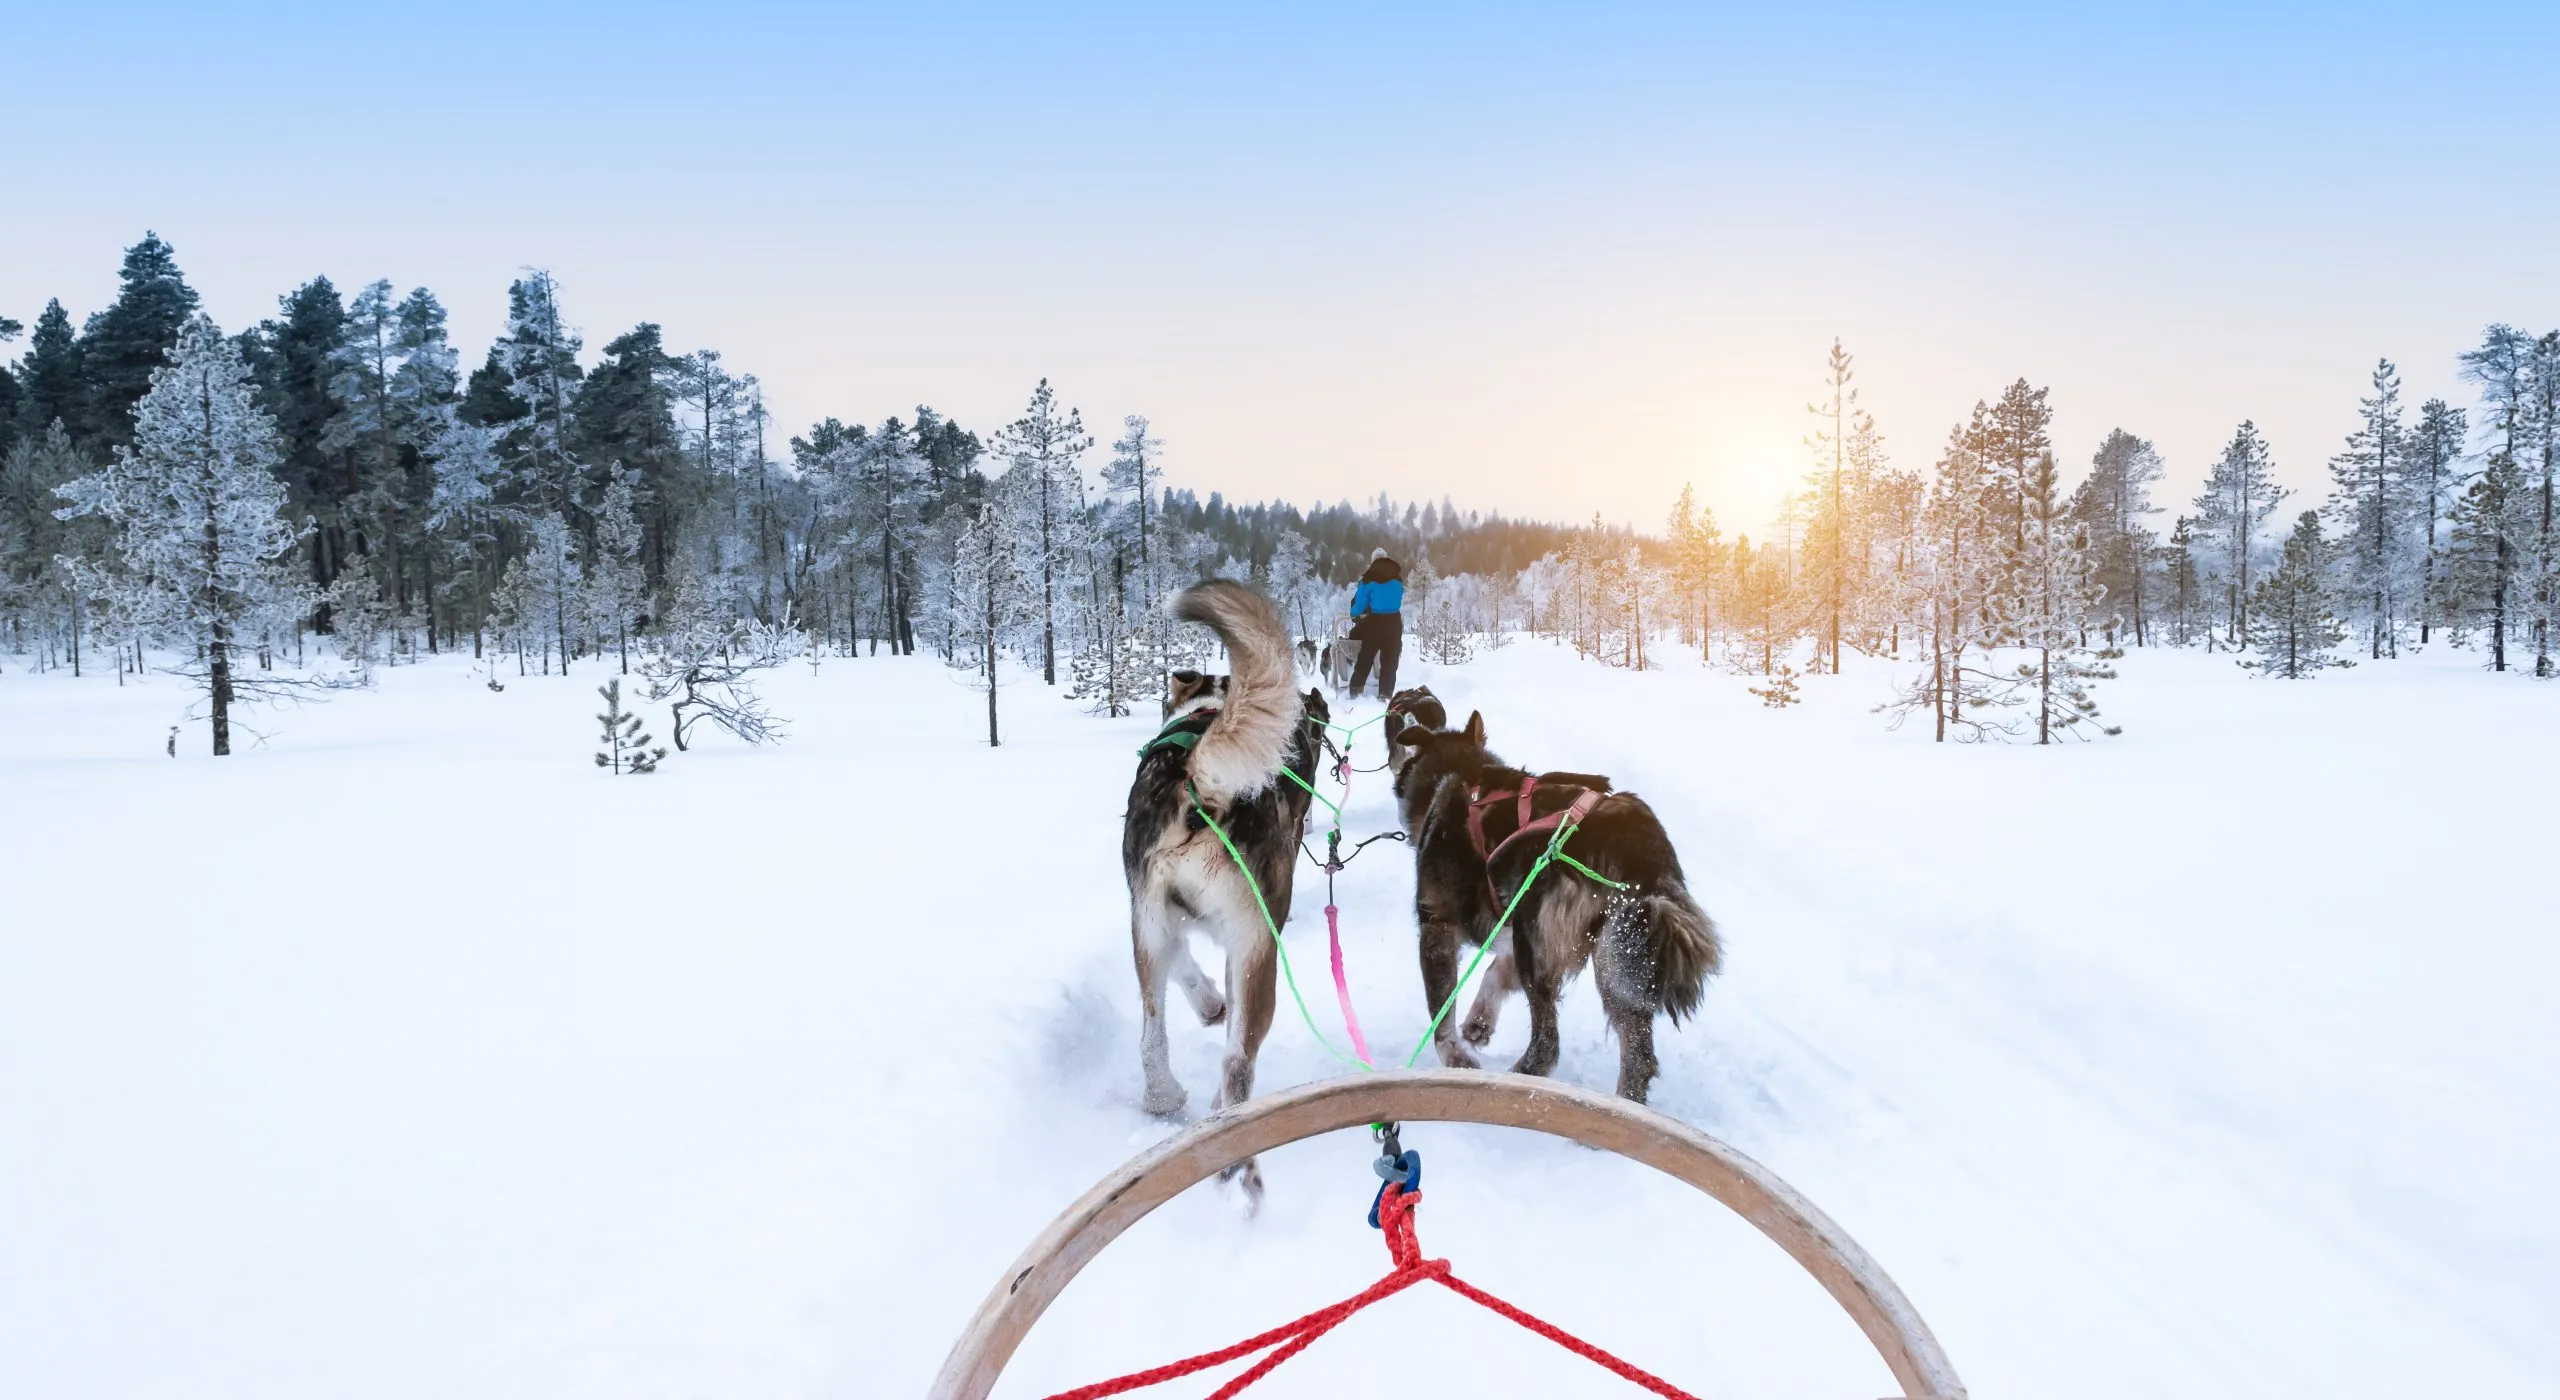 Dog sledding in snowy winter forest, Finland, Lapland.